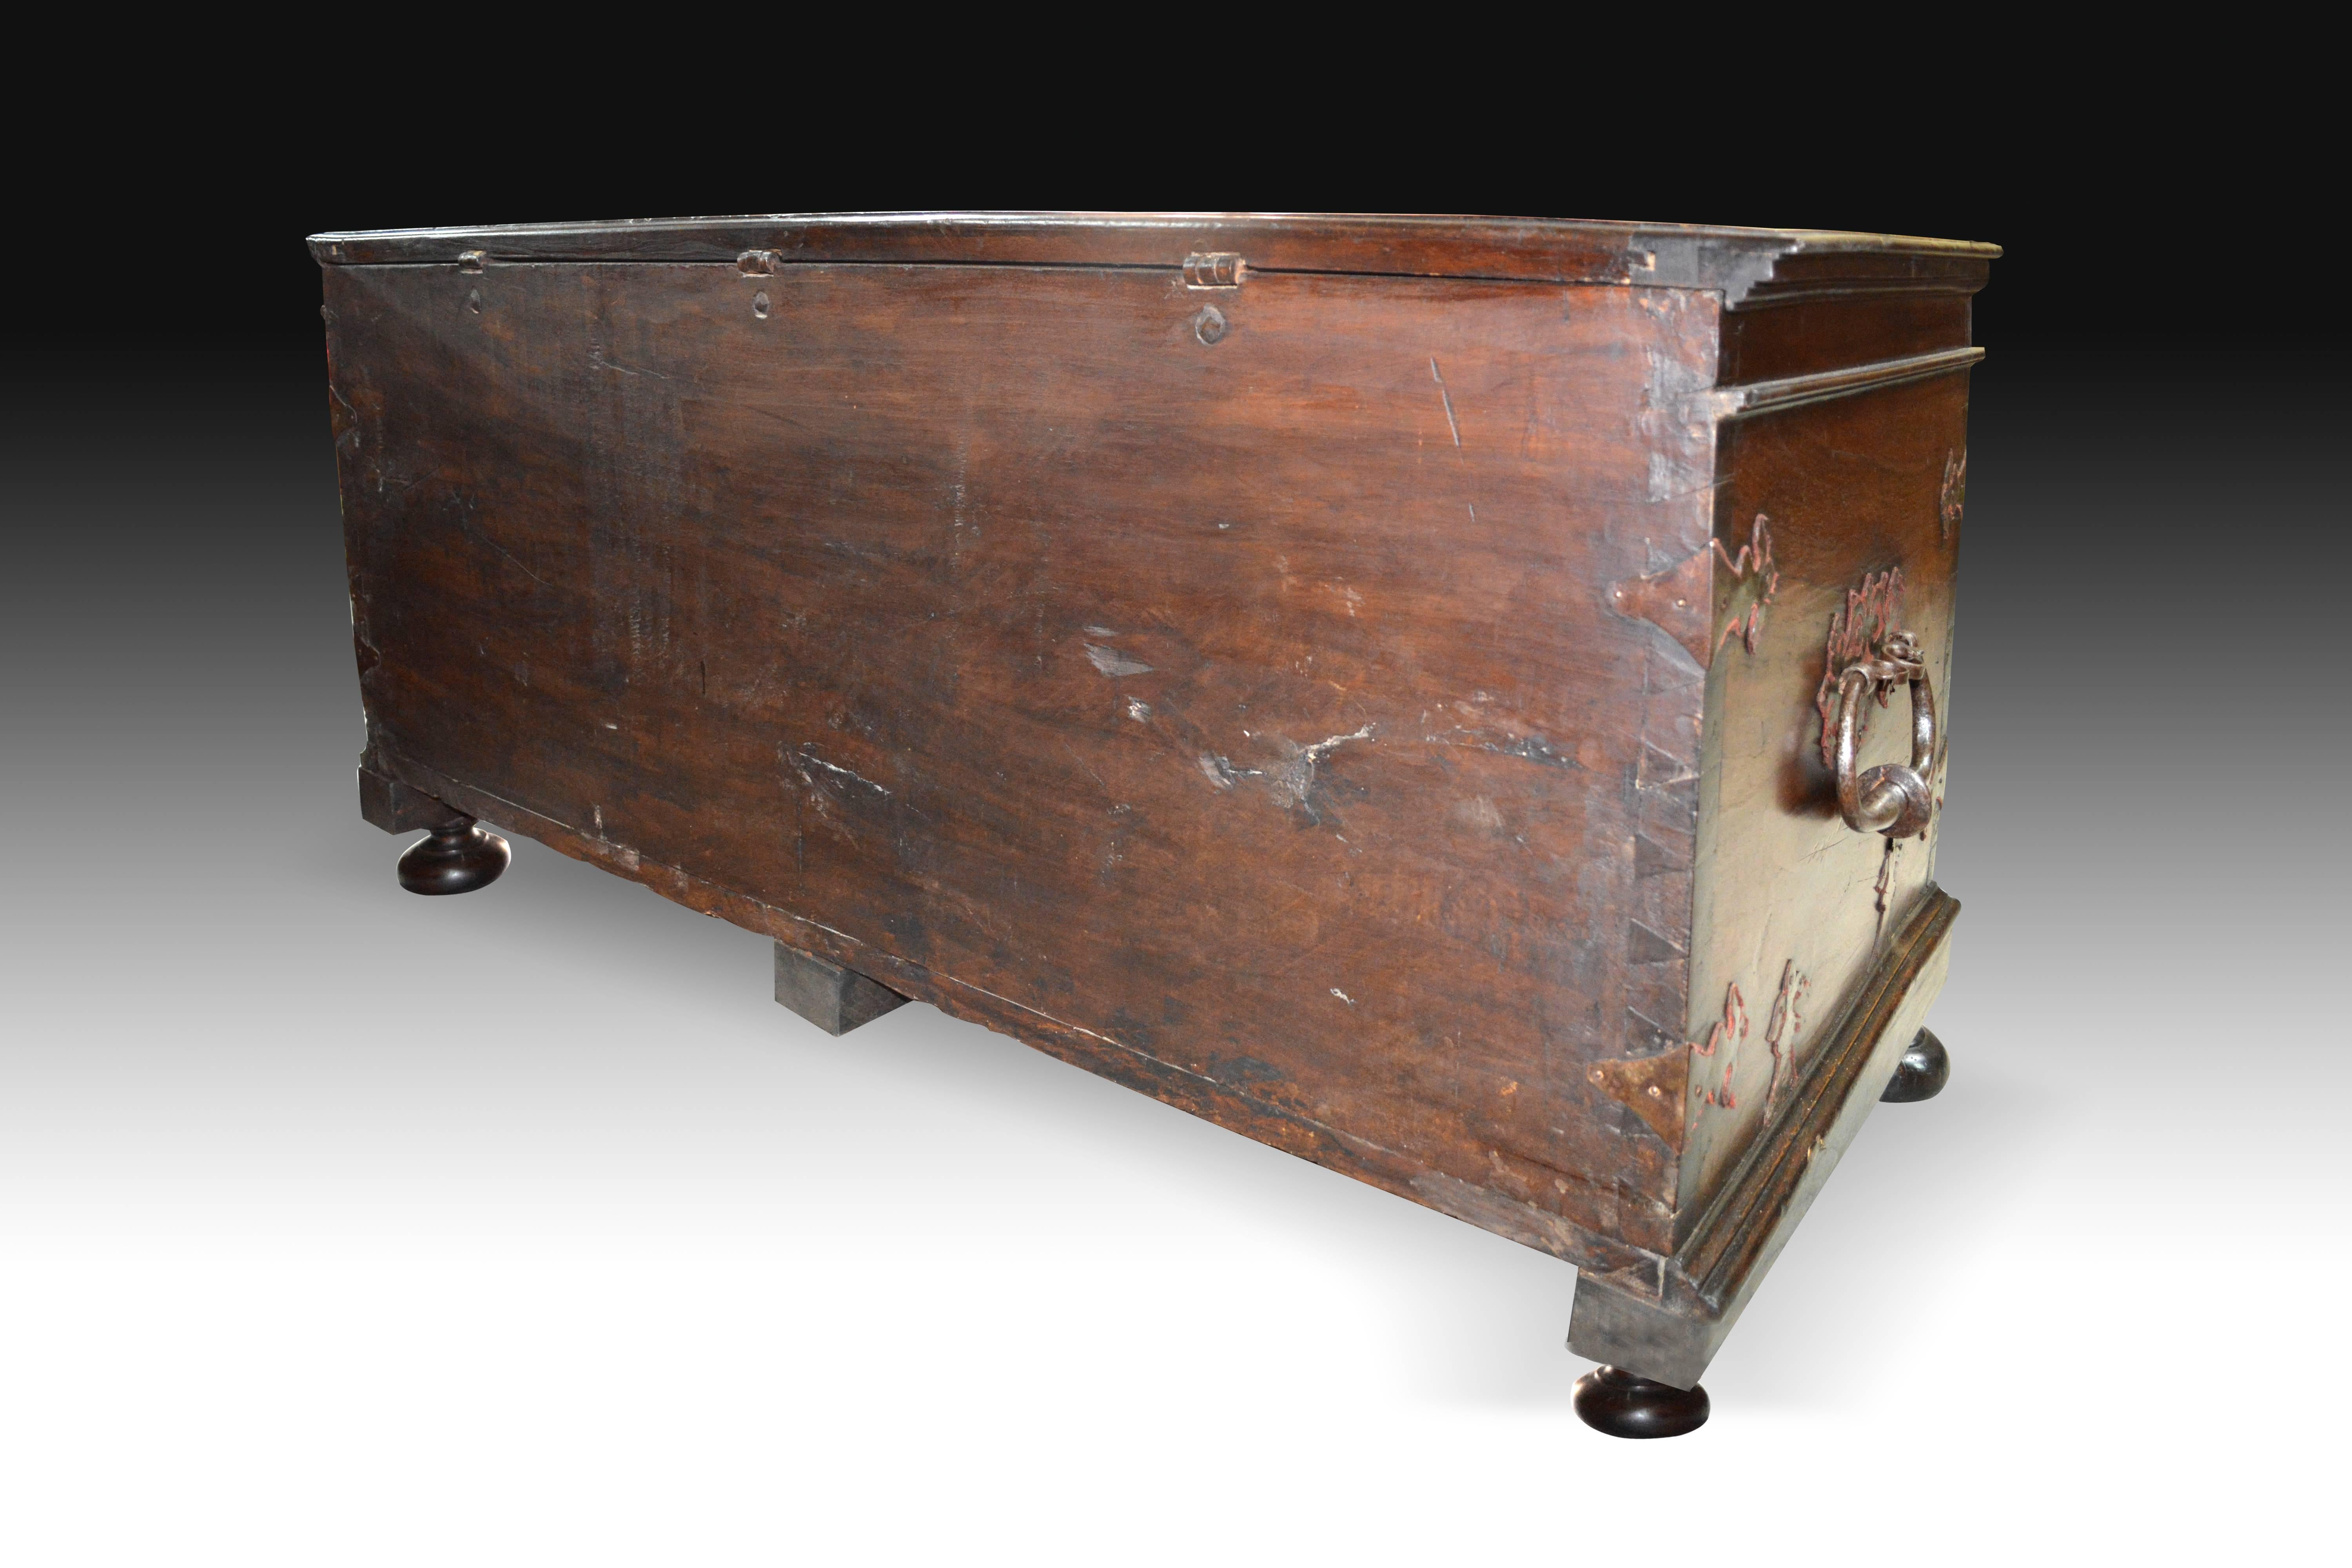 Hand-Carved Walnut and Metal Chest with Two Locks, 17th Century